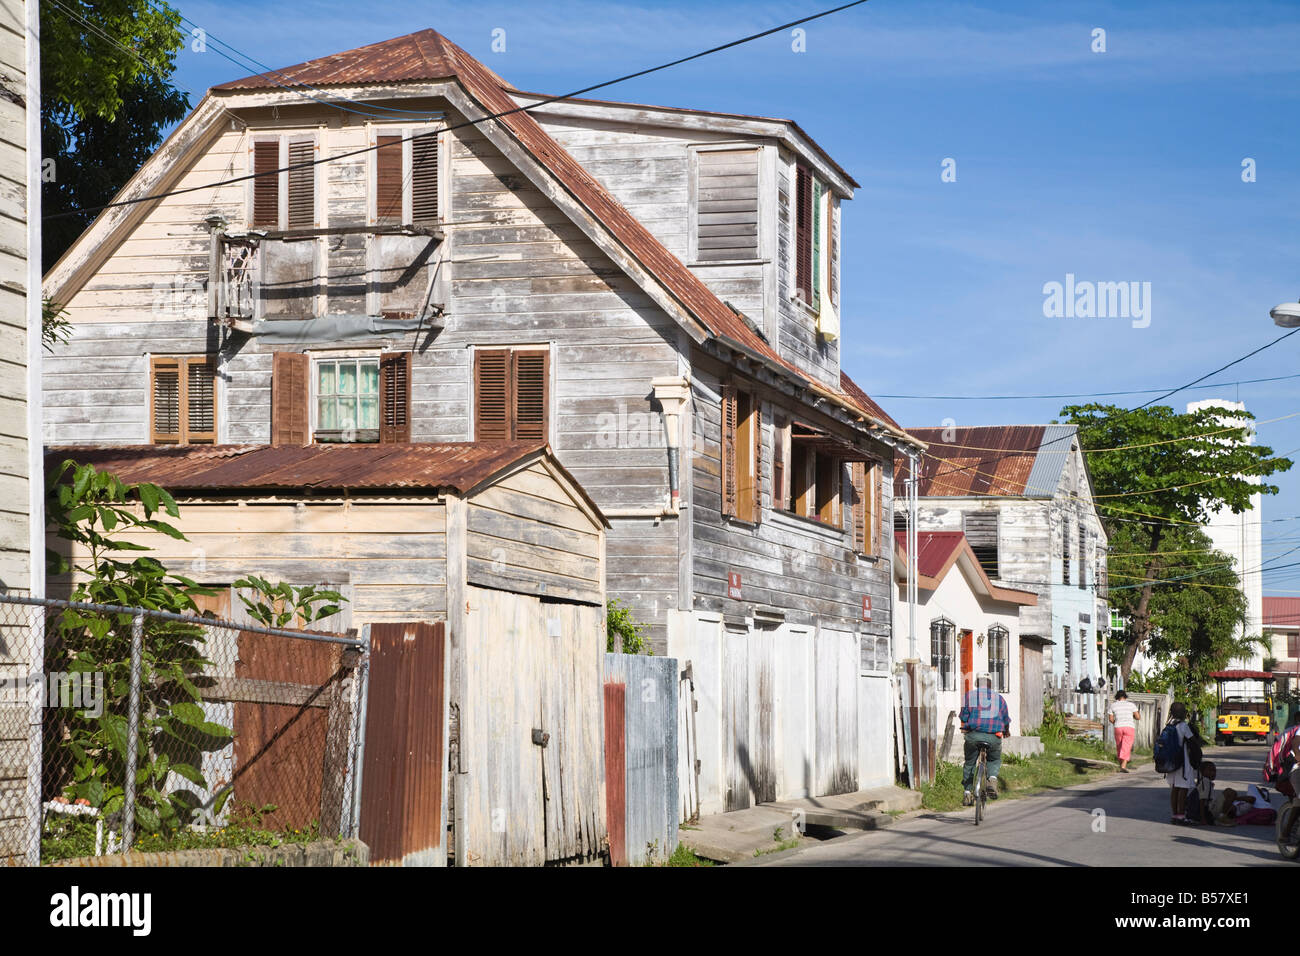 Street with wooden colonial buildings Fort George District Belize City Belize Central America Stock Photo